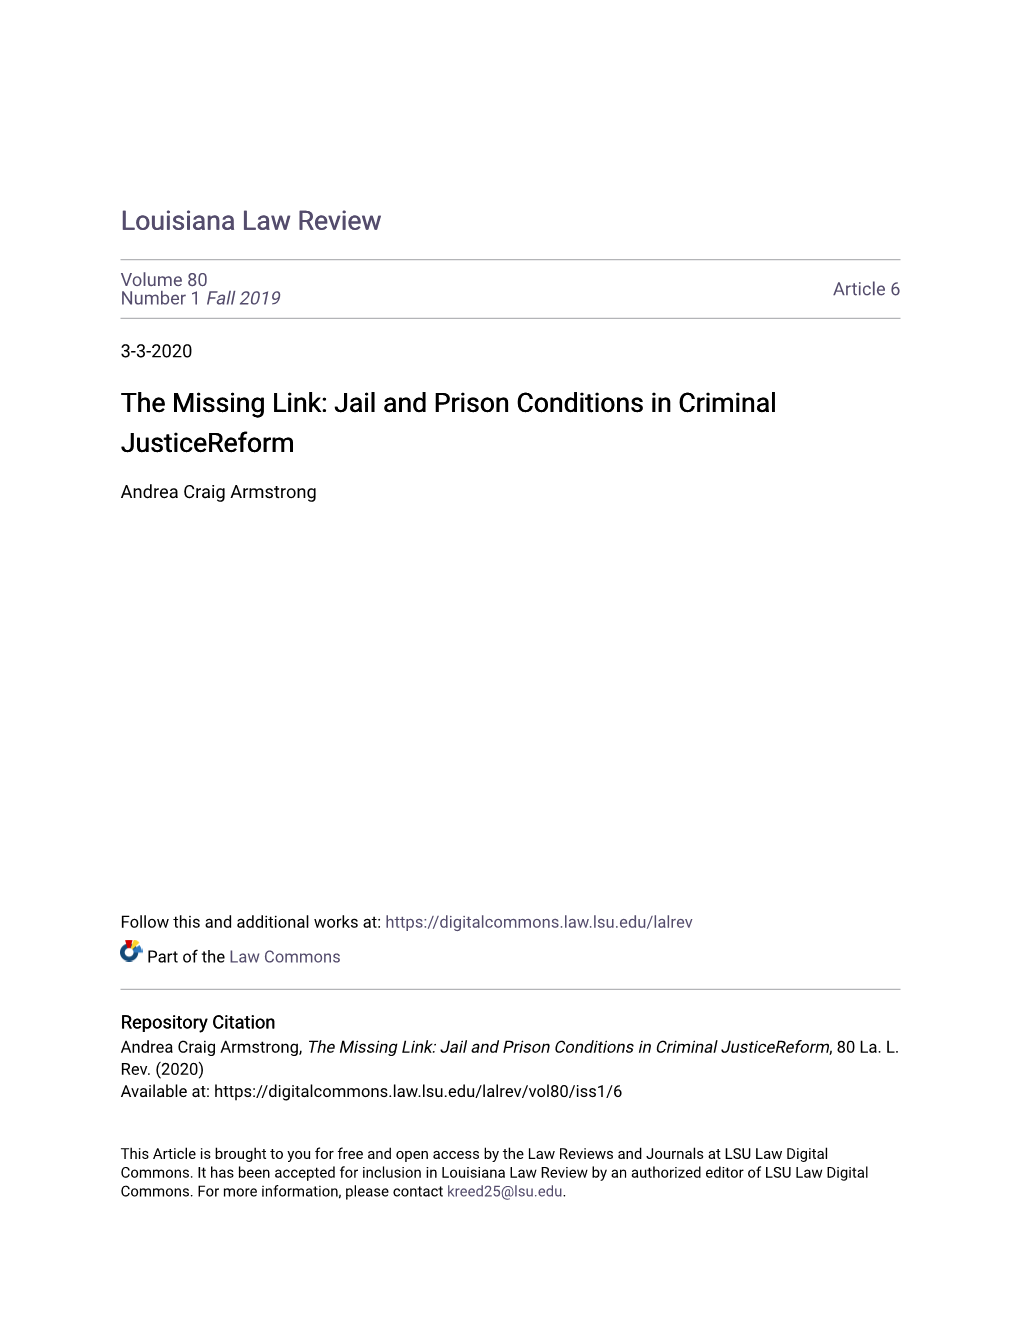 The Missing Link: Jail and Prison Conditions in Criminal Justicereform